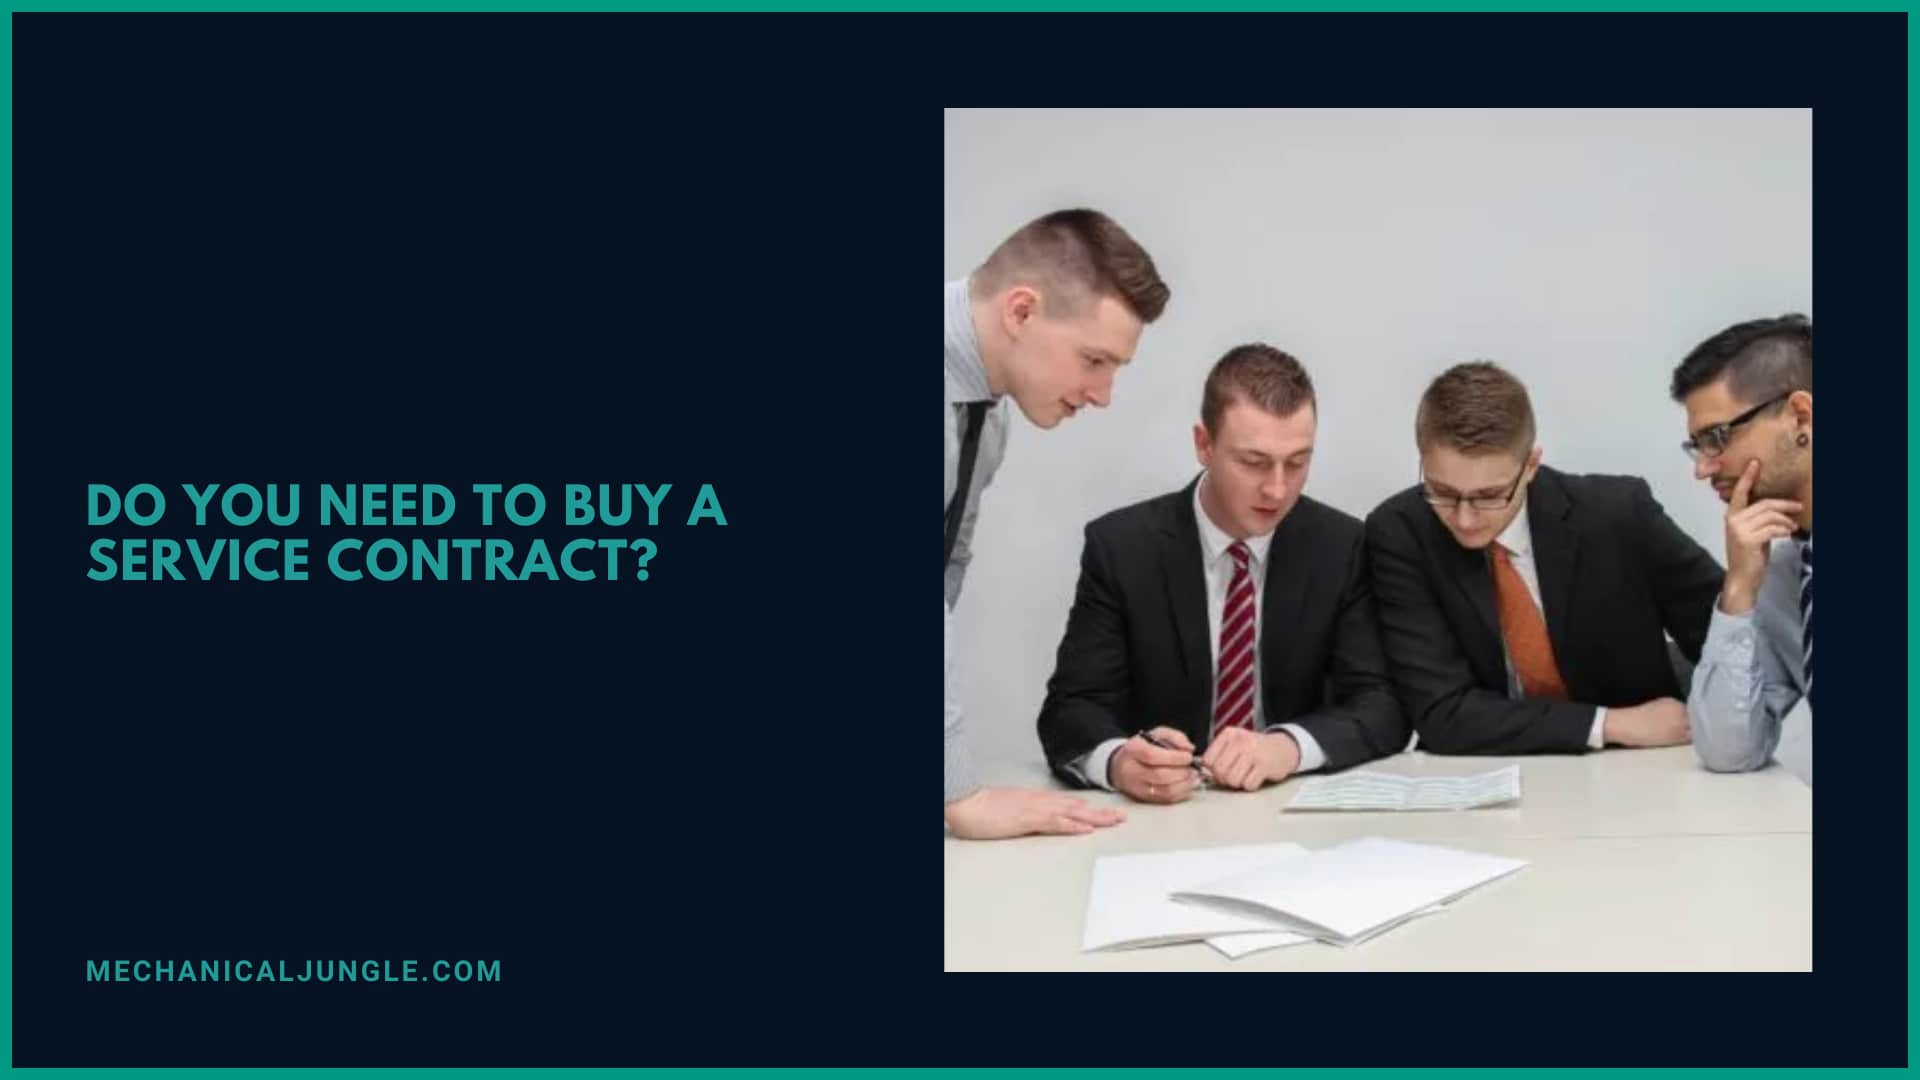 Do You Need to Buy a Service Contract?